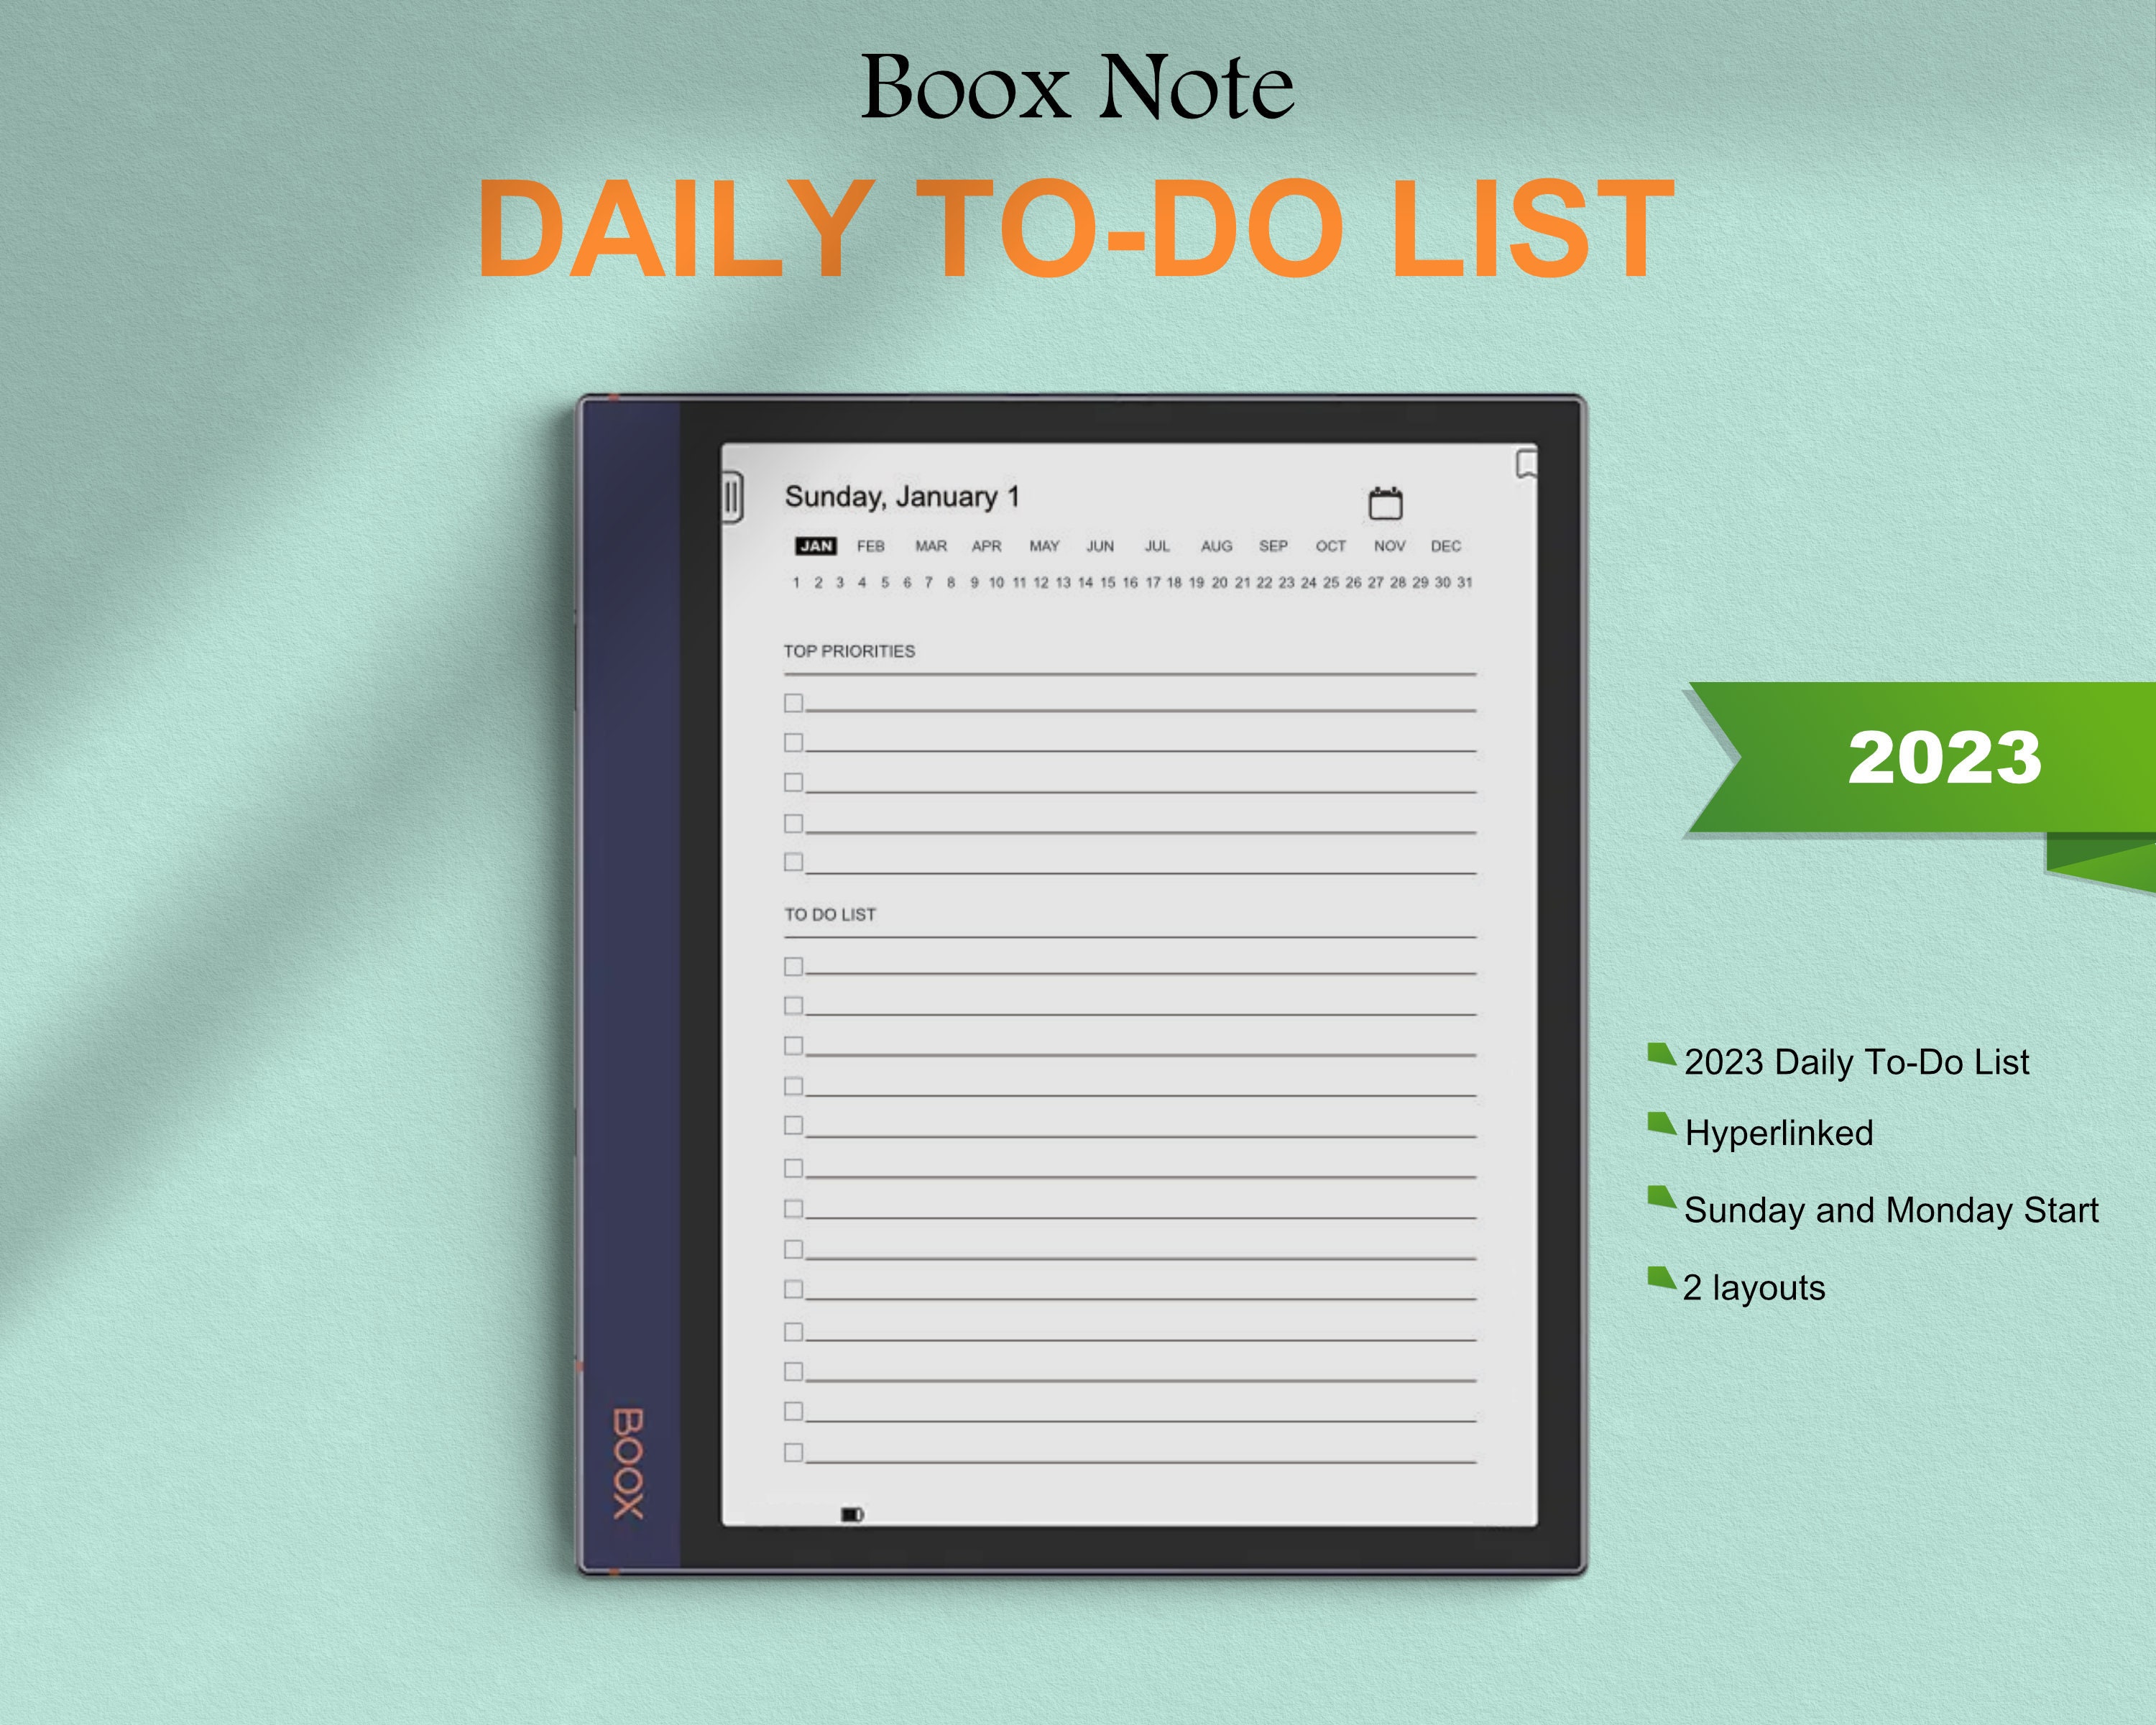 boox-note-templates-2023-daily-to-do-list-boox-note-air-etsy